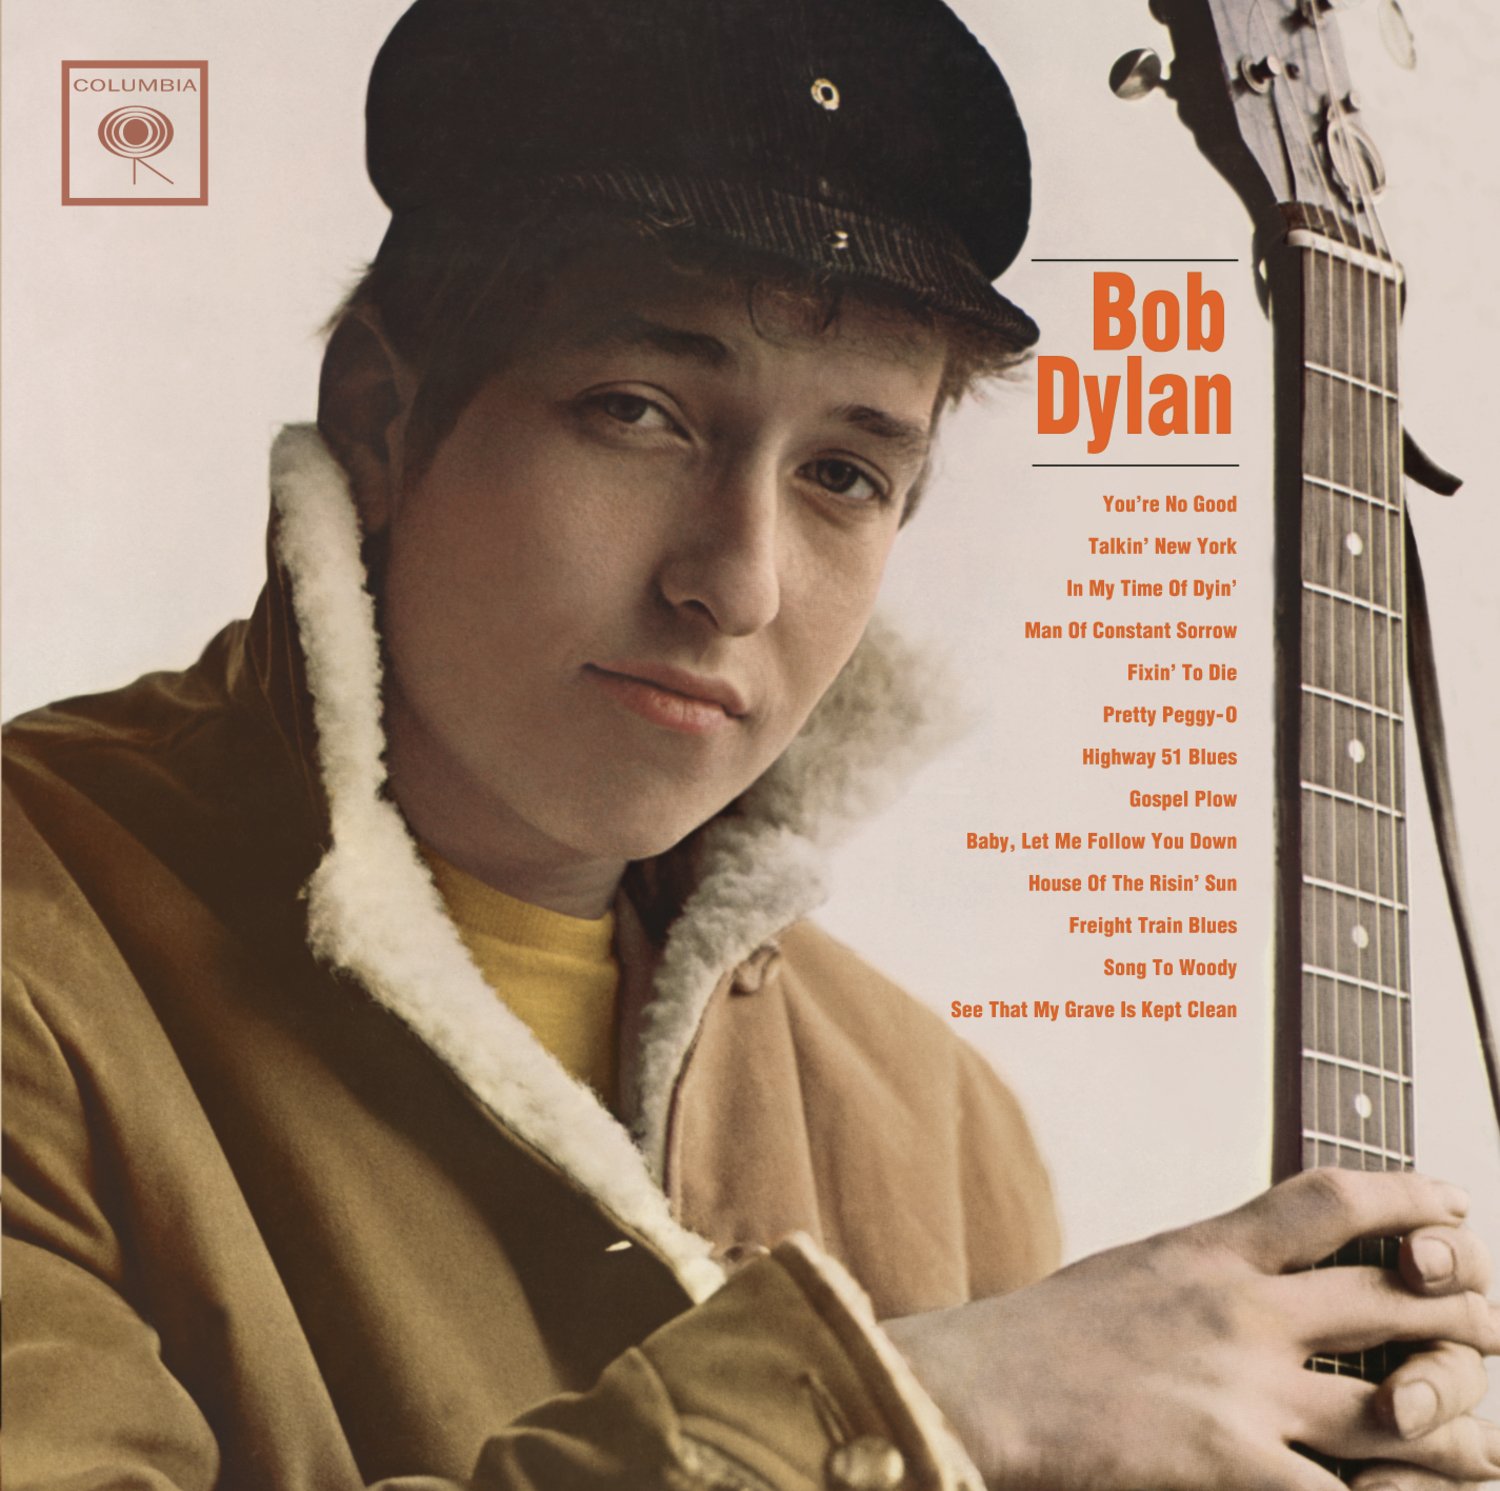 Dylan's debut album 60 years ago changed the times